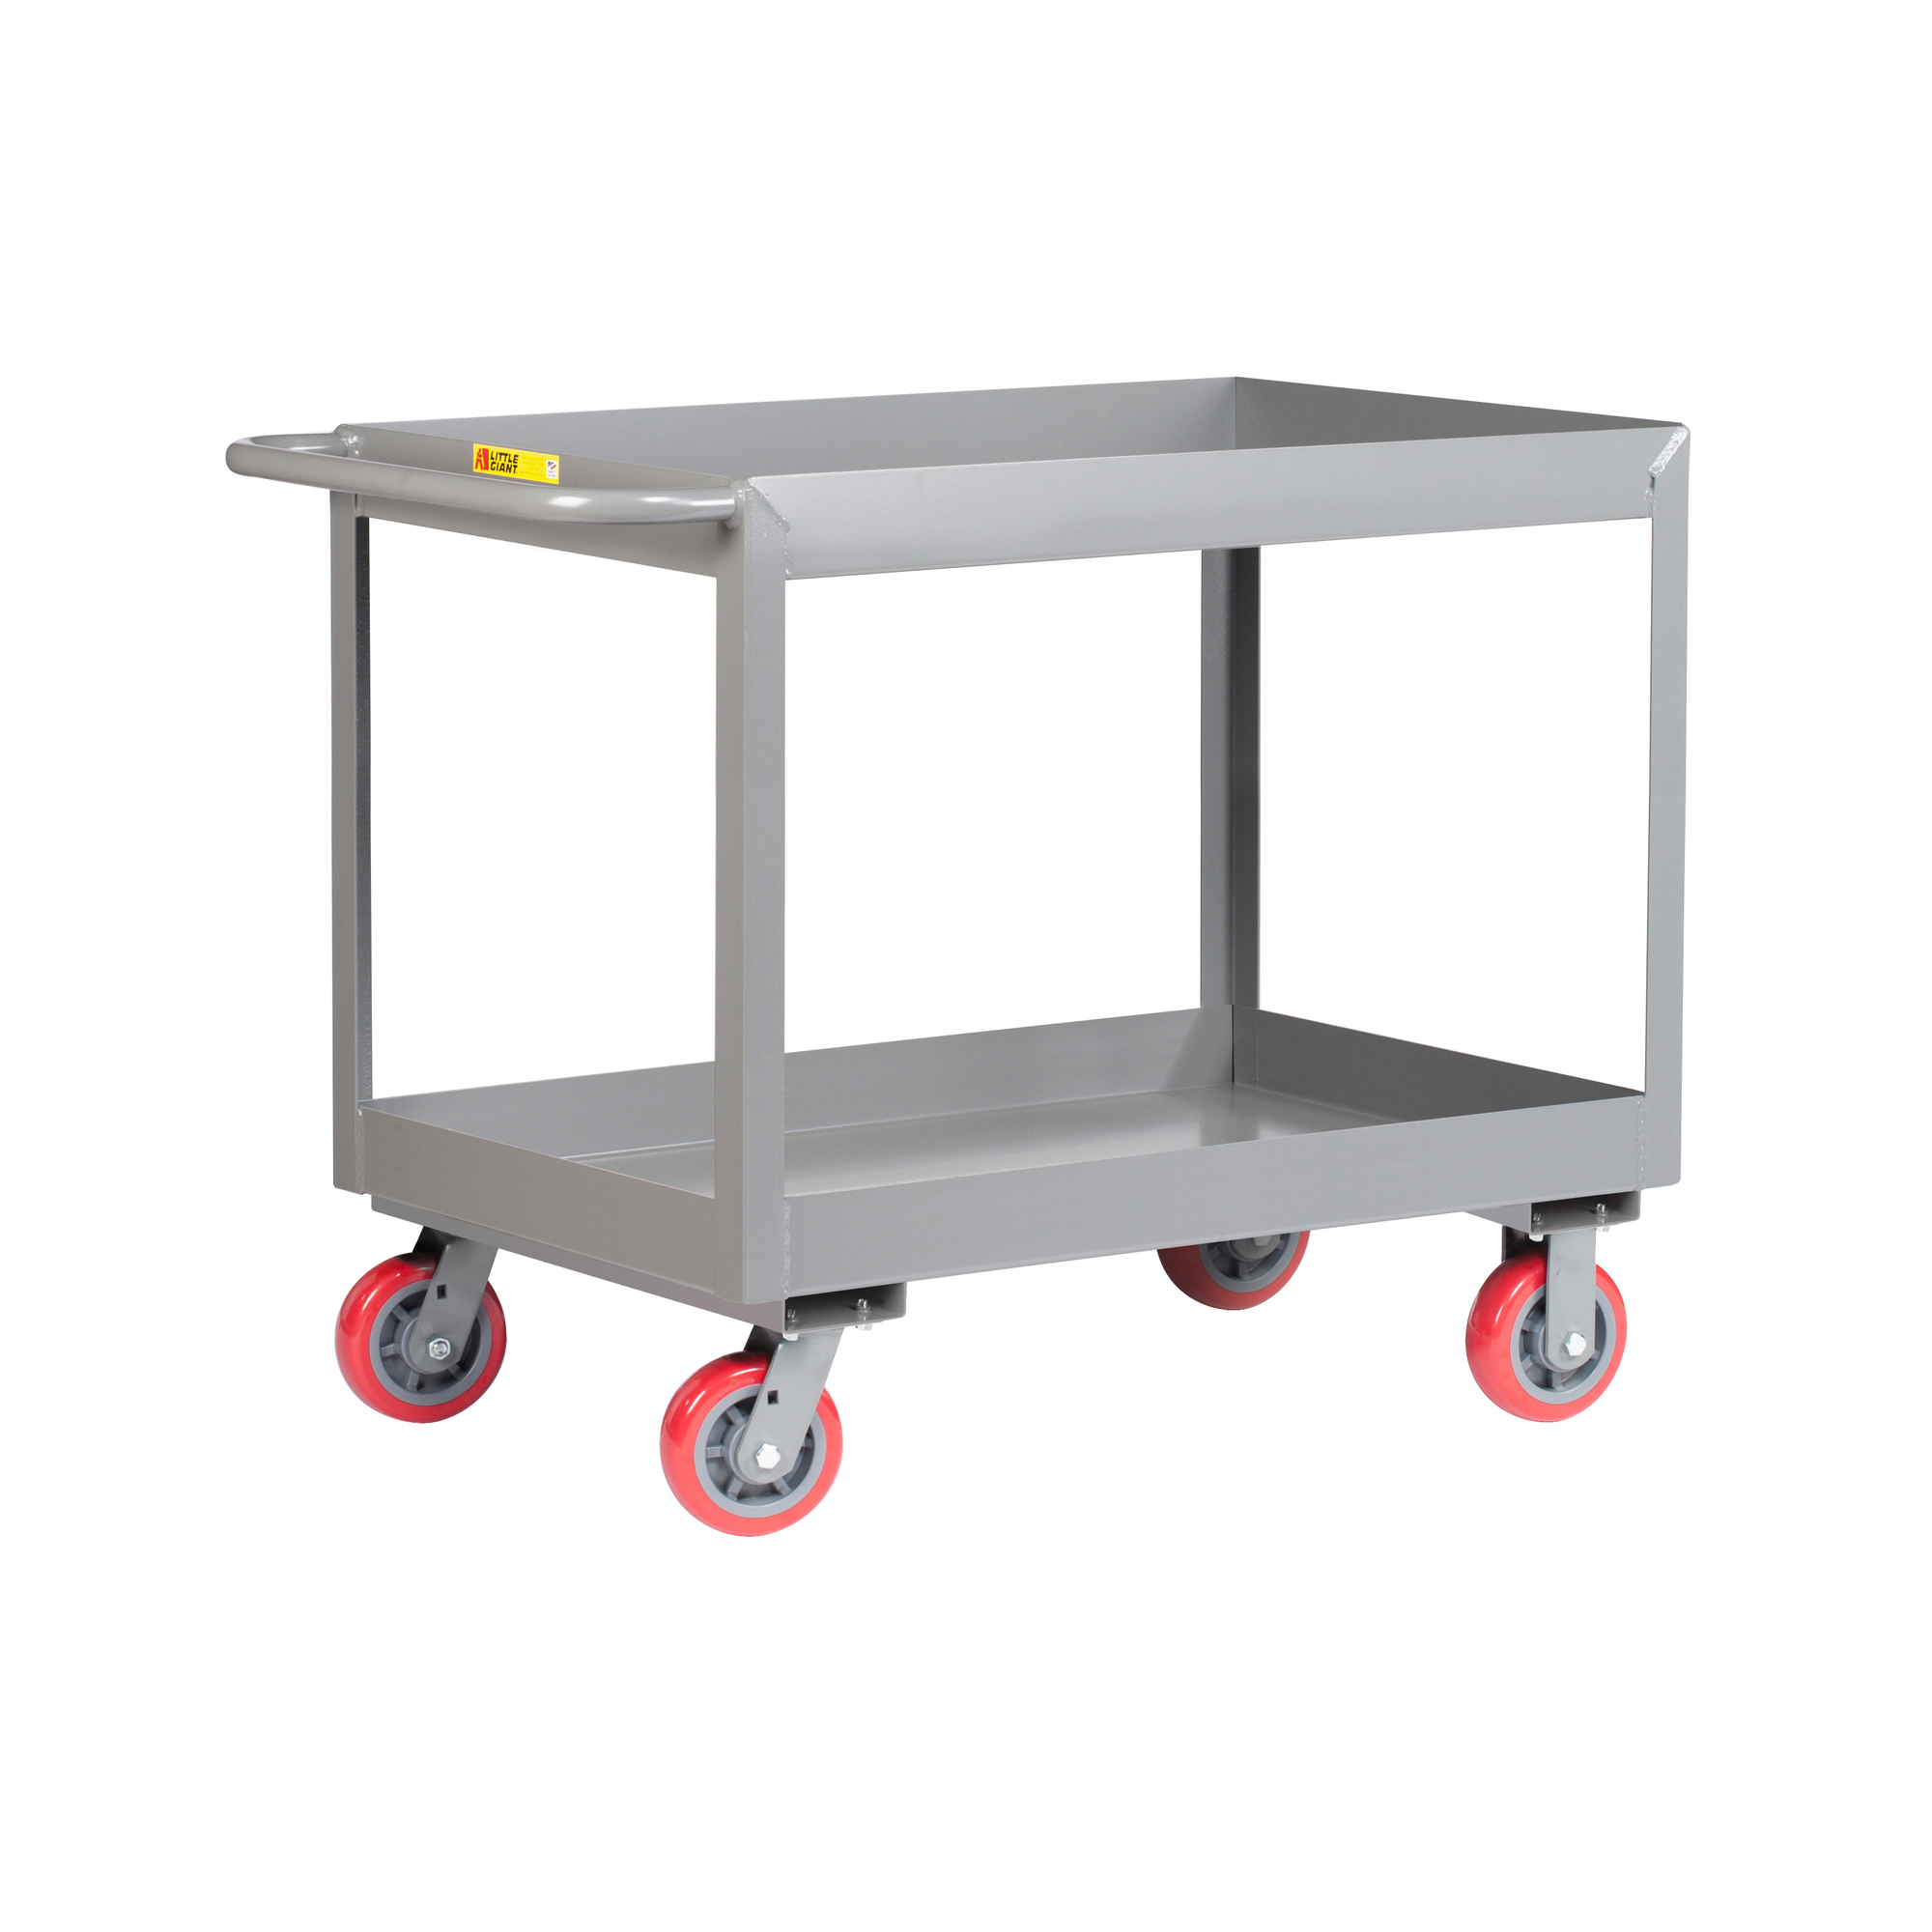 Little Giant, 3Inch Deep Shelf Truck, 24x48, 3600 lbs, Total Capacity 3600 lb, Shelves (qty.) 2, Material Carbon Steel, Model DS2448X3-6PY